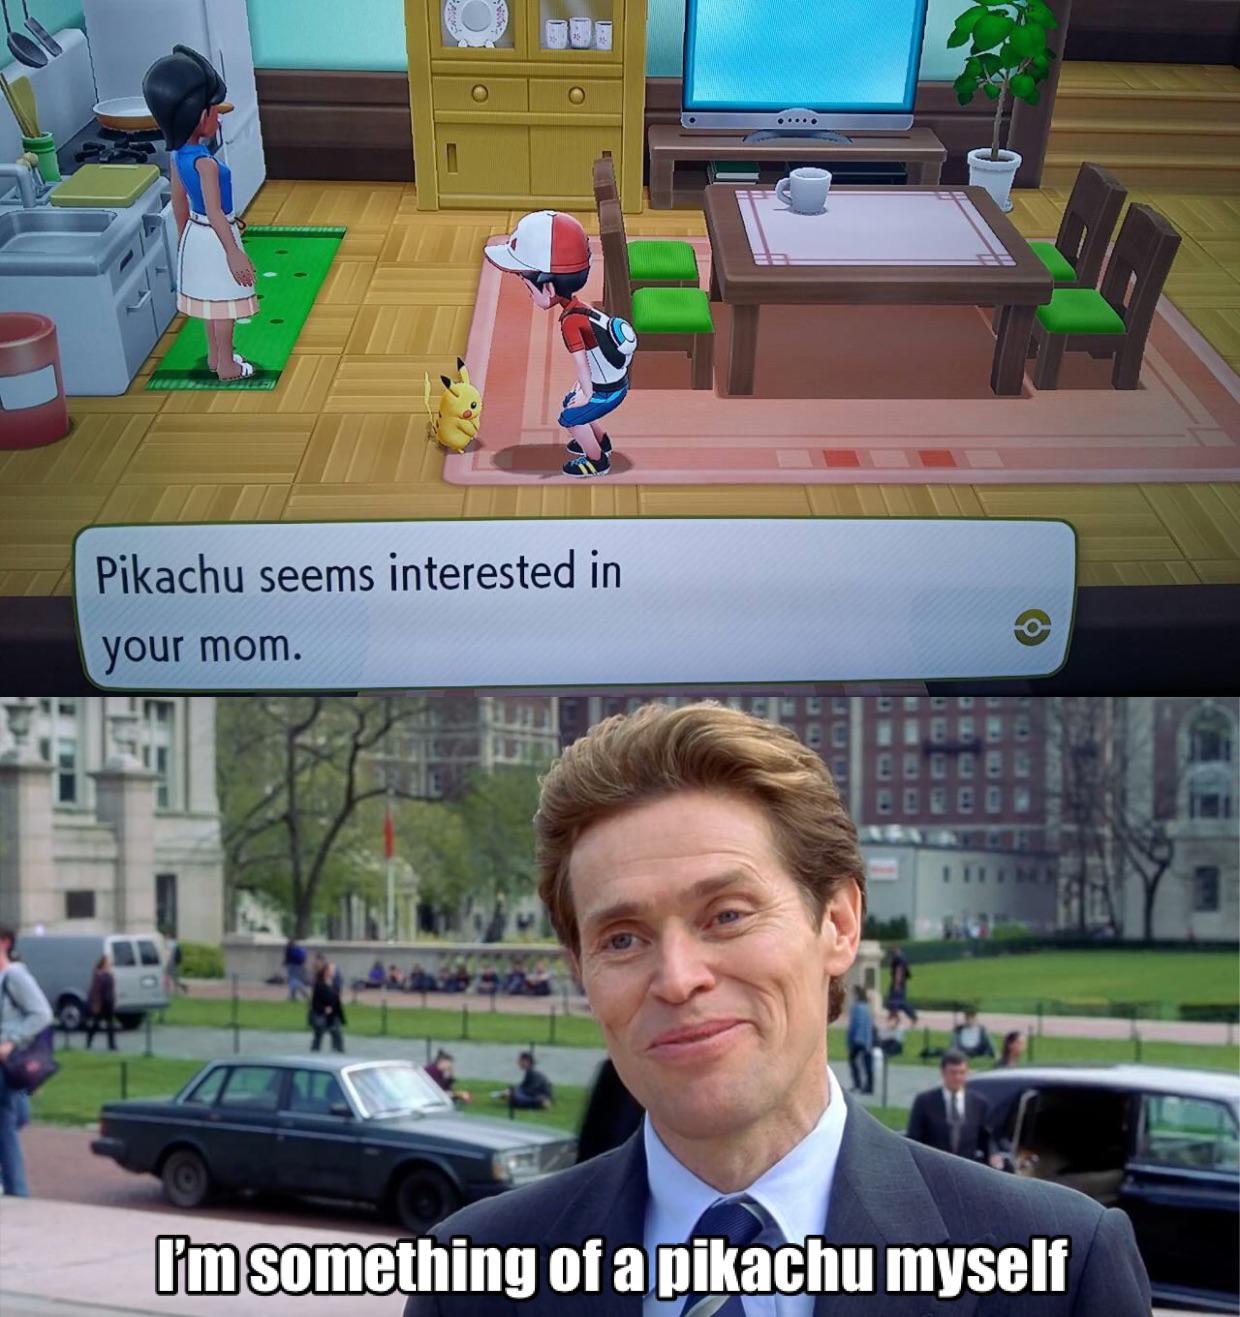 c# programming meme - Pikachu seems interested in your mom. I'm something of a pikachu myself